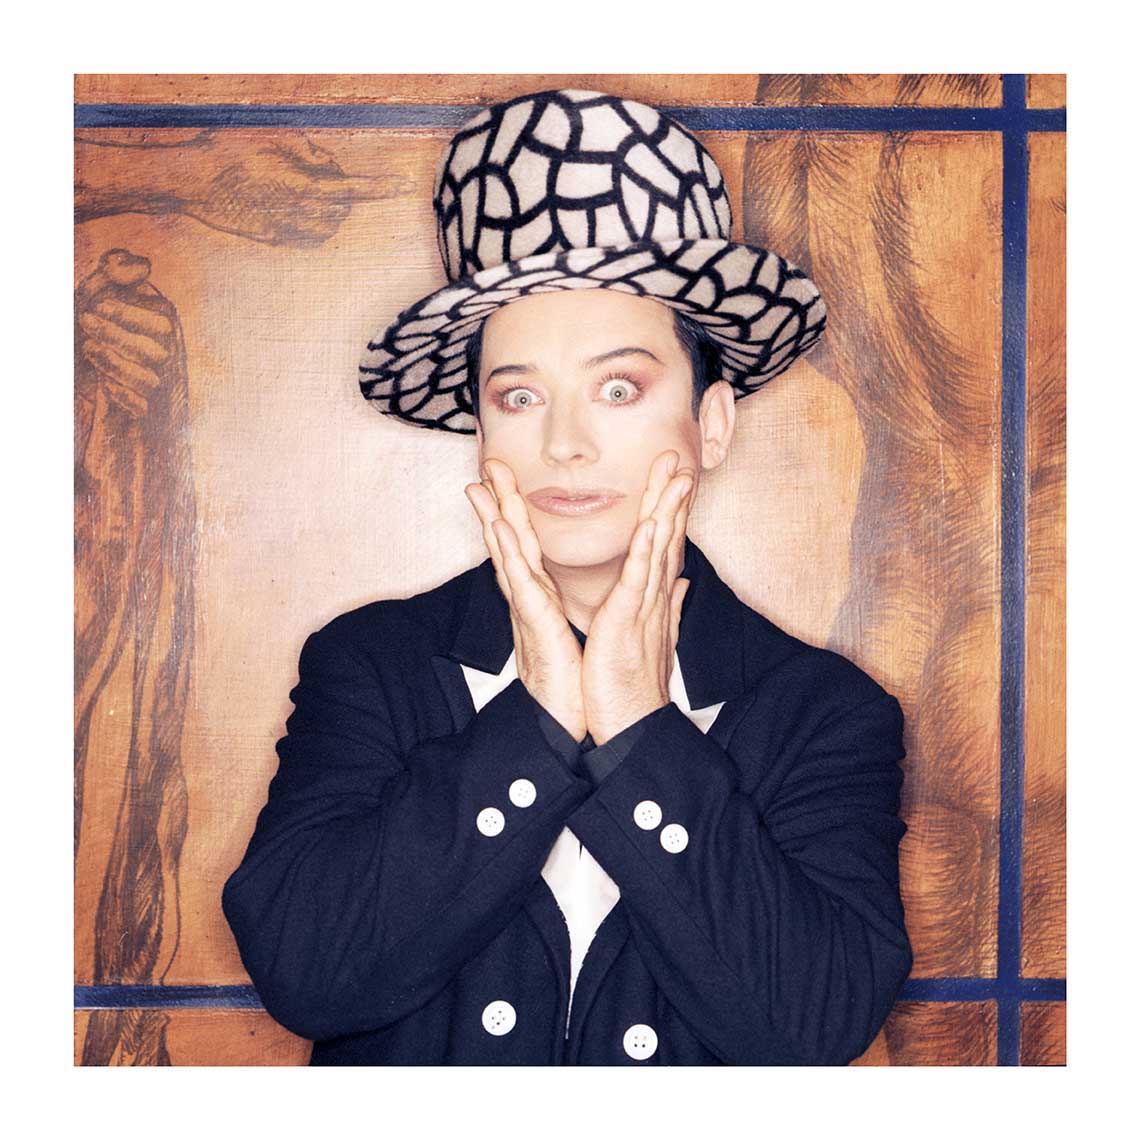 Culture Club - Boy George Wearing a Suit and Hat, London, 1998 Print (2/2)